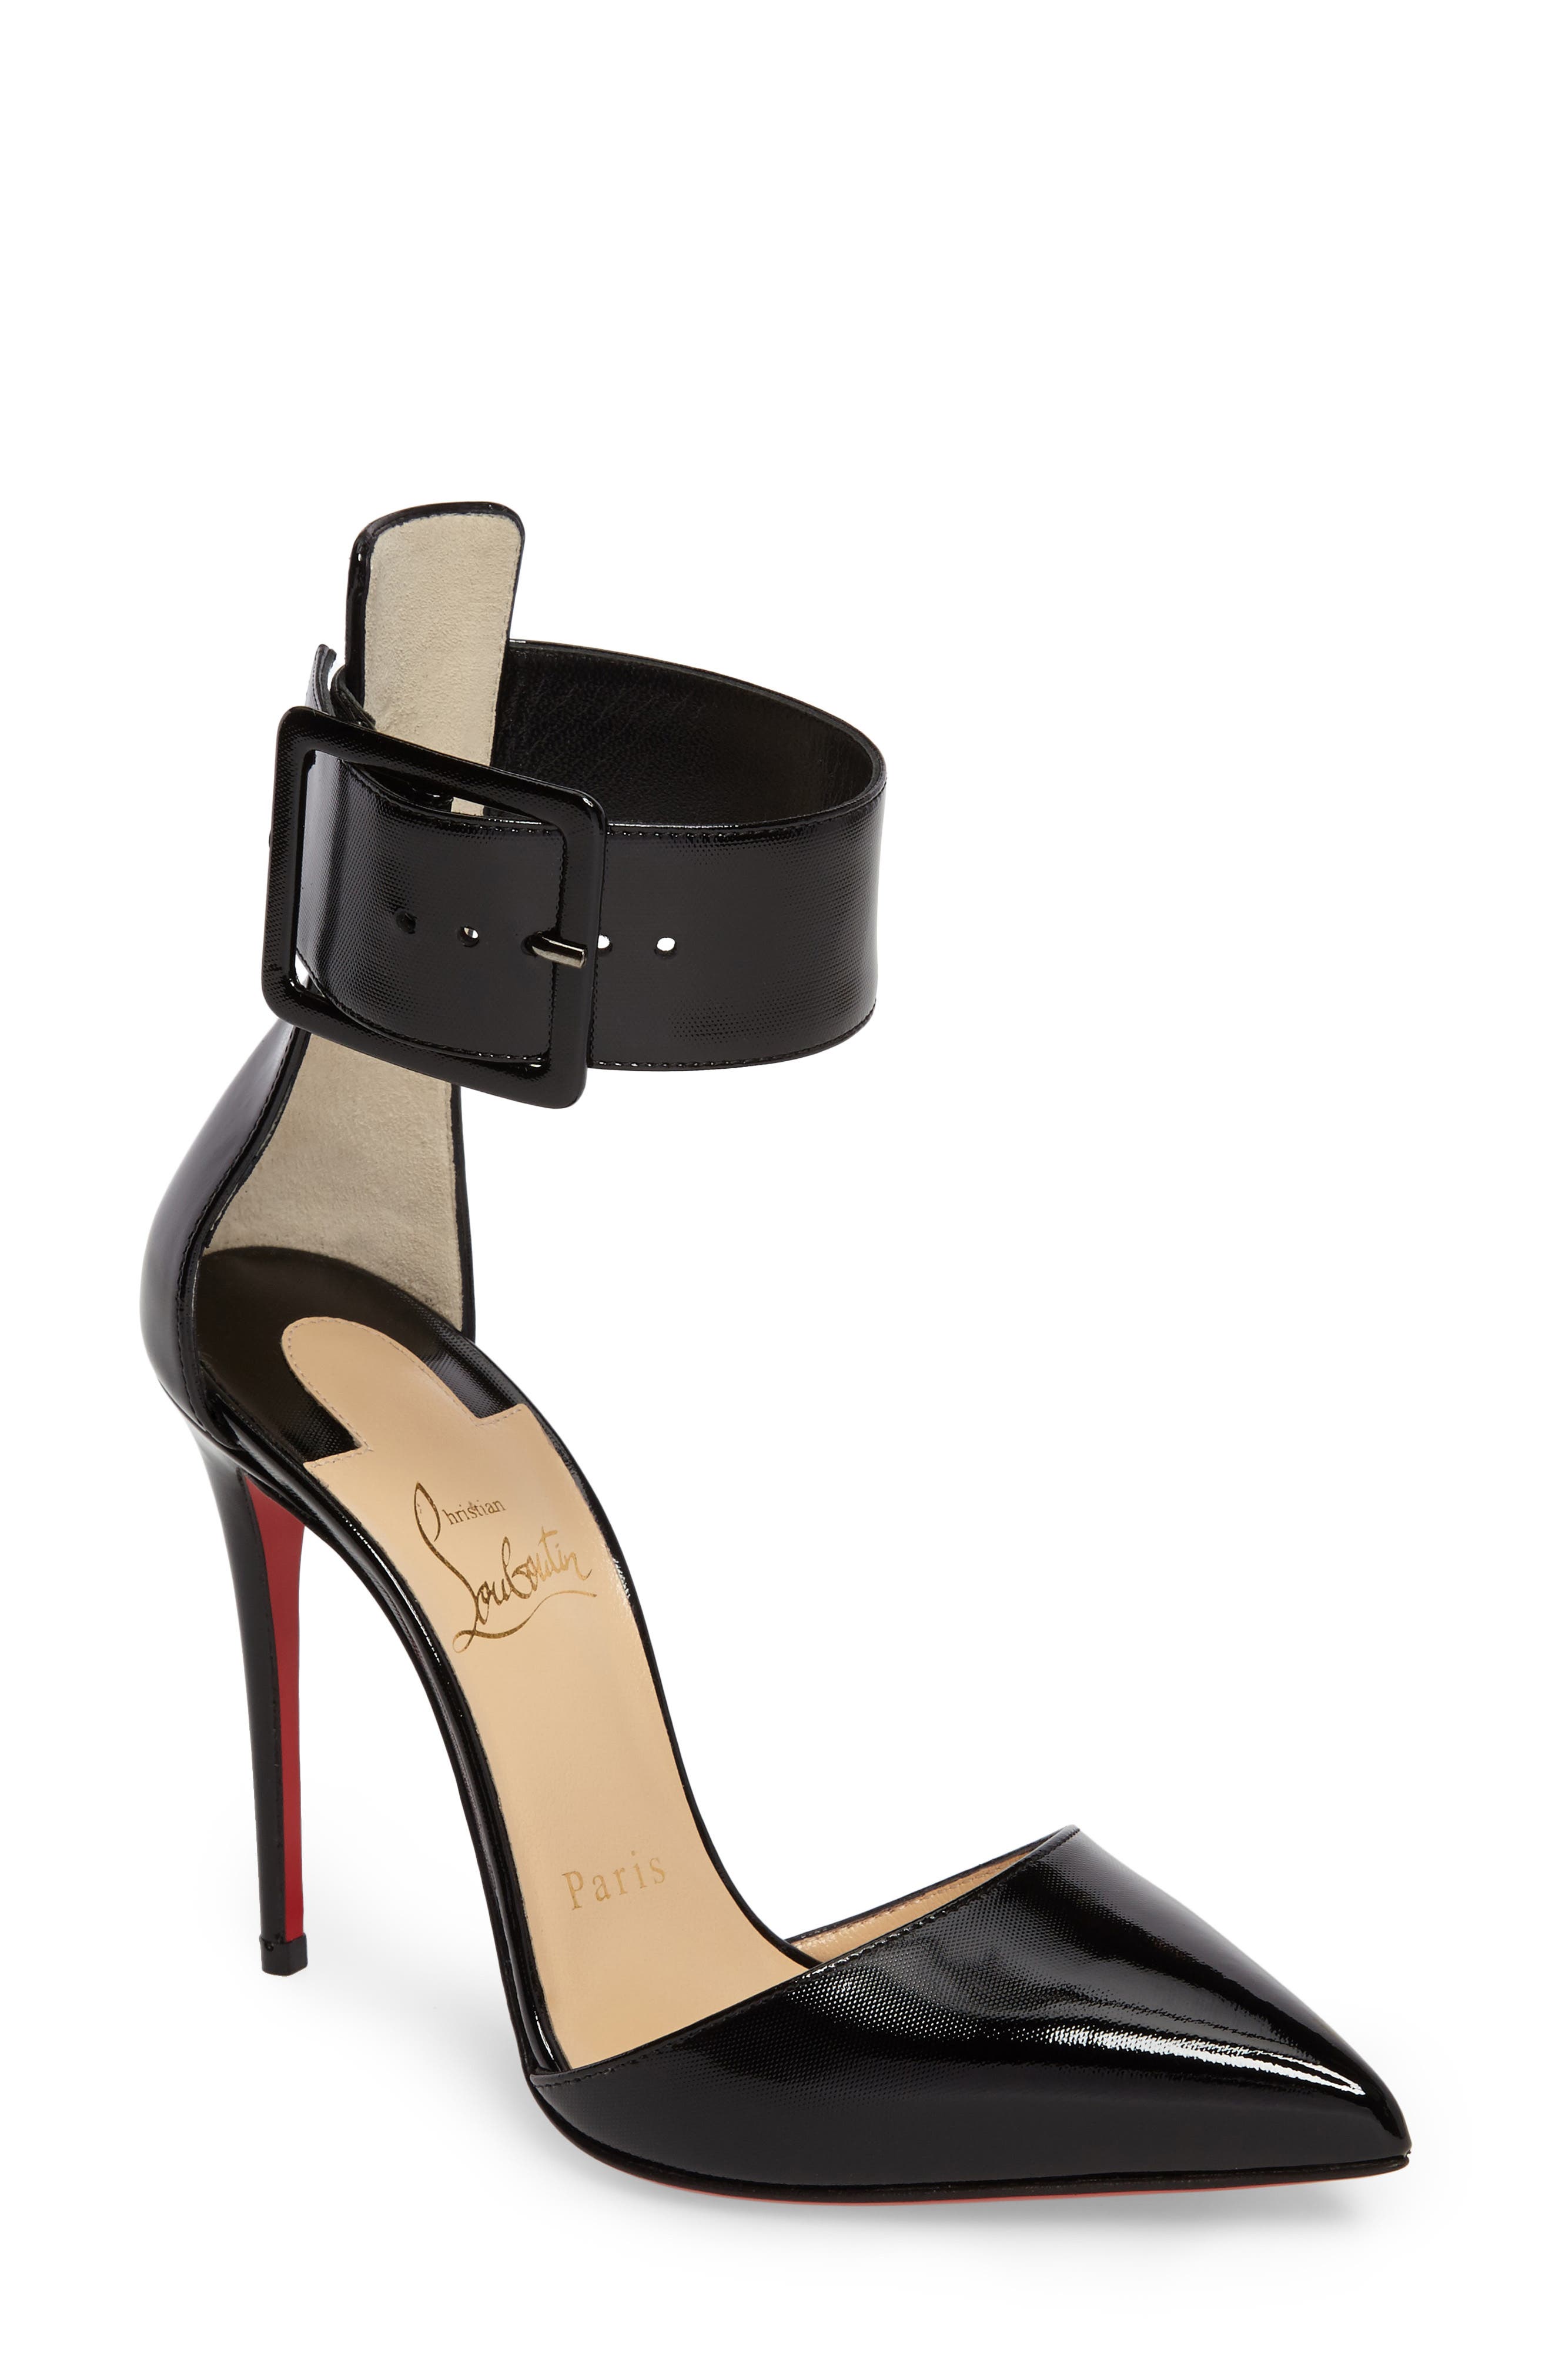 louboutin heels with ankle strap